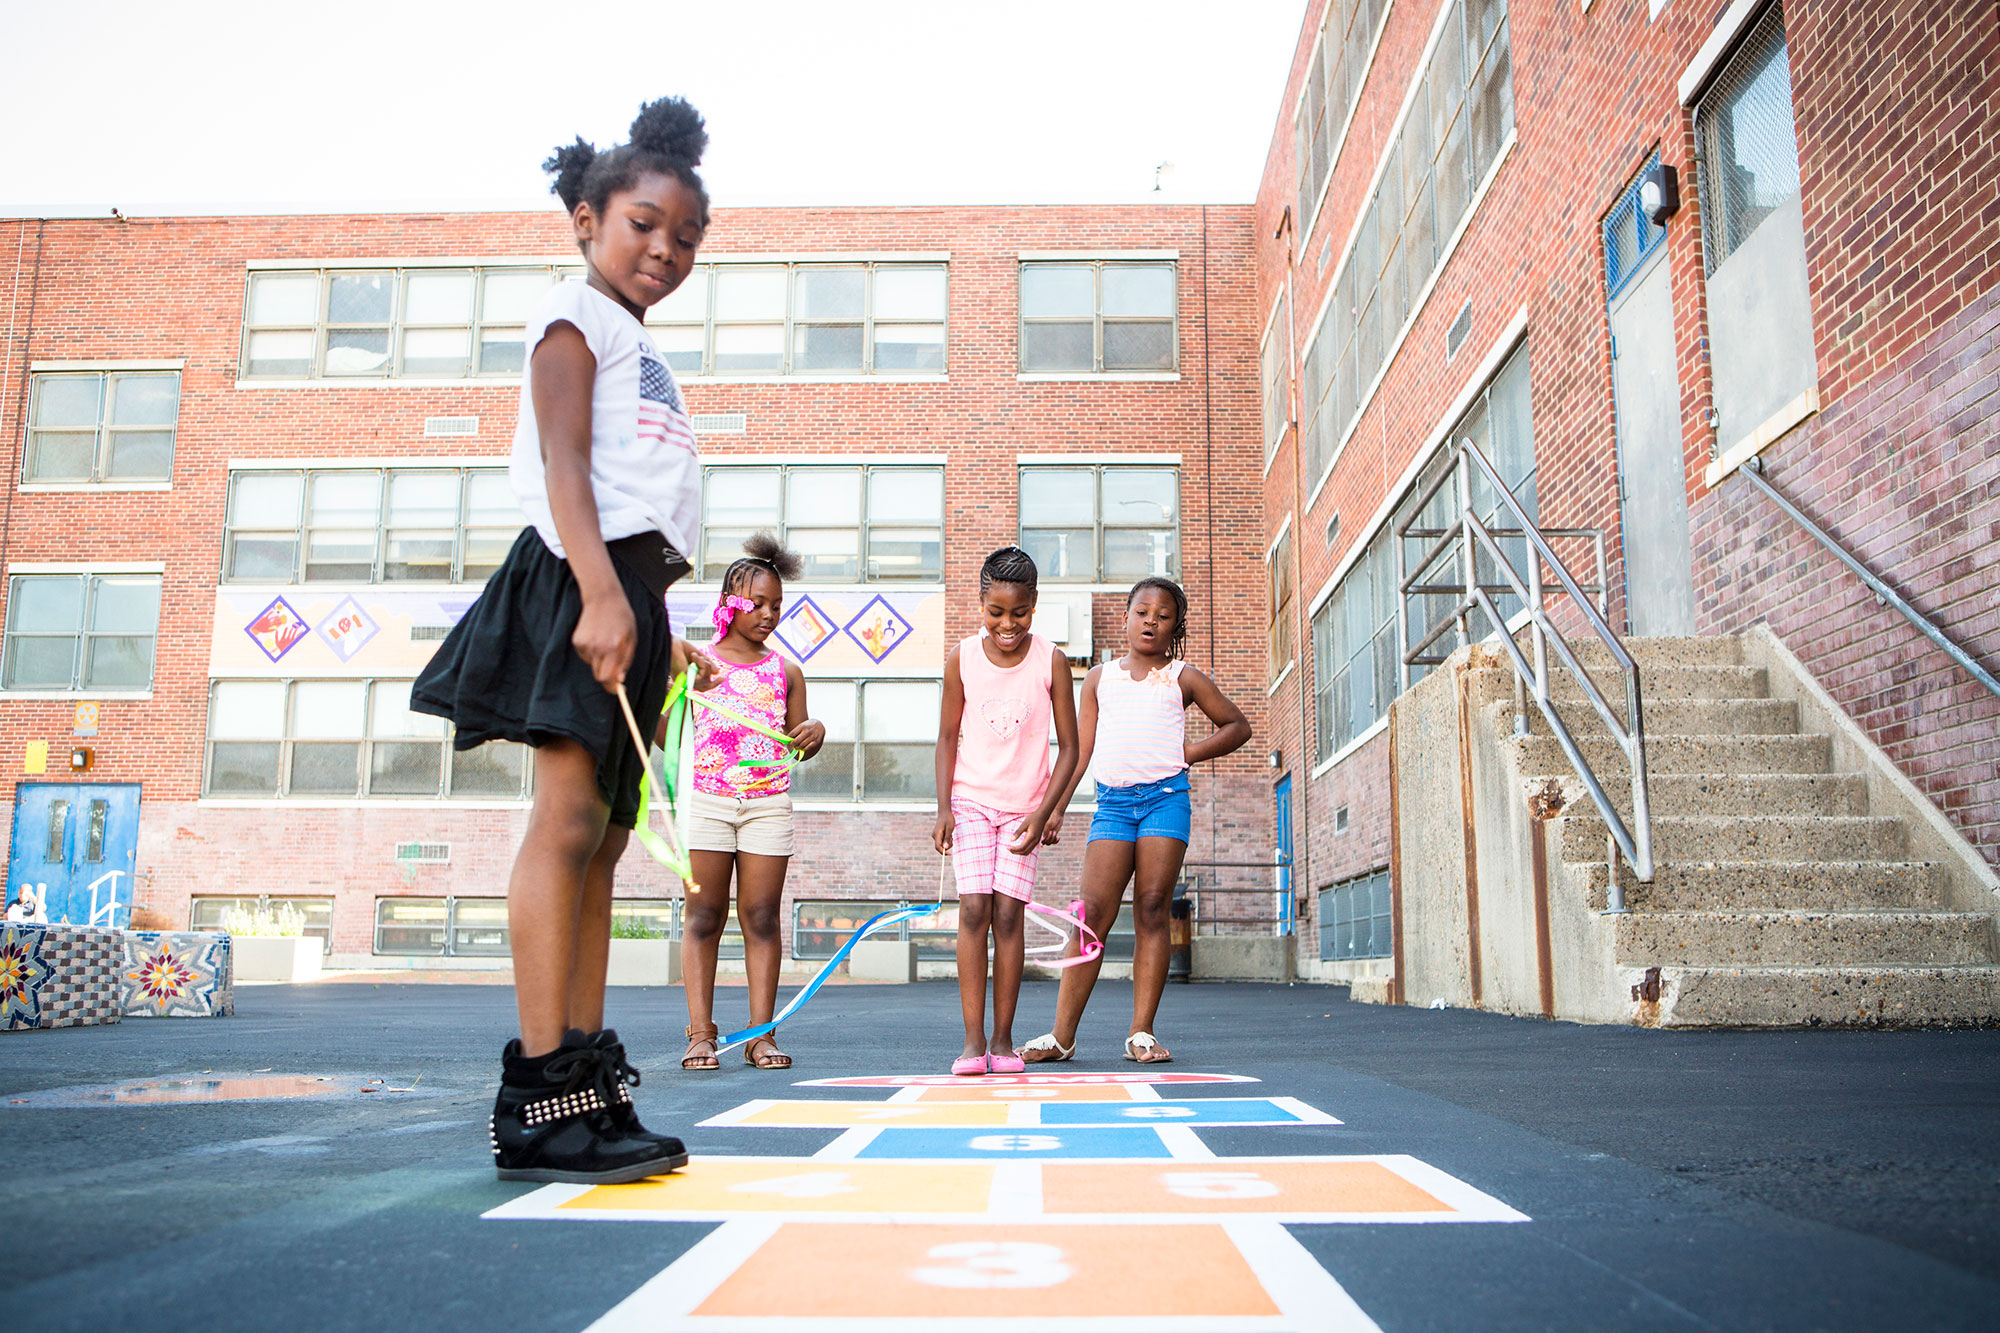 A group of young girls playing hopscotch on a sidewalk.